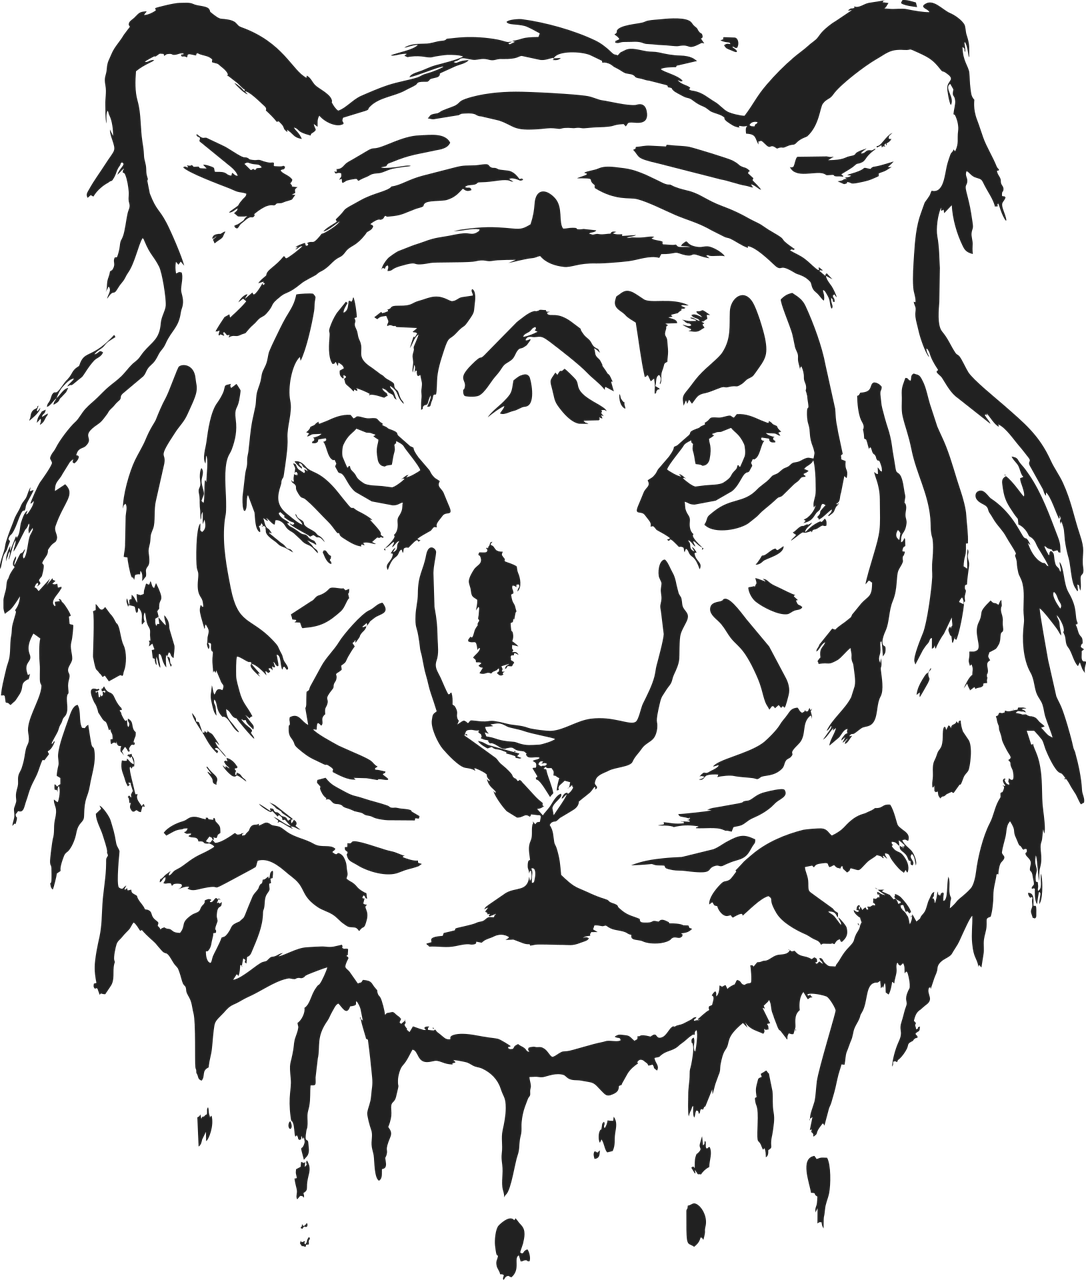 Coloring page of a tiger